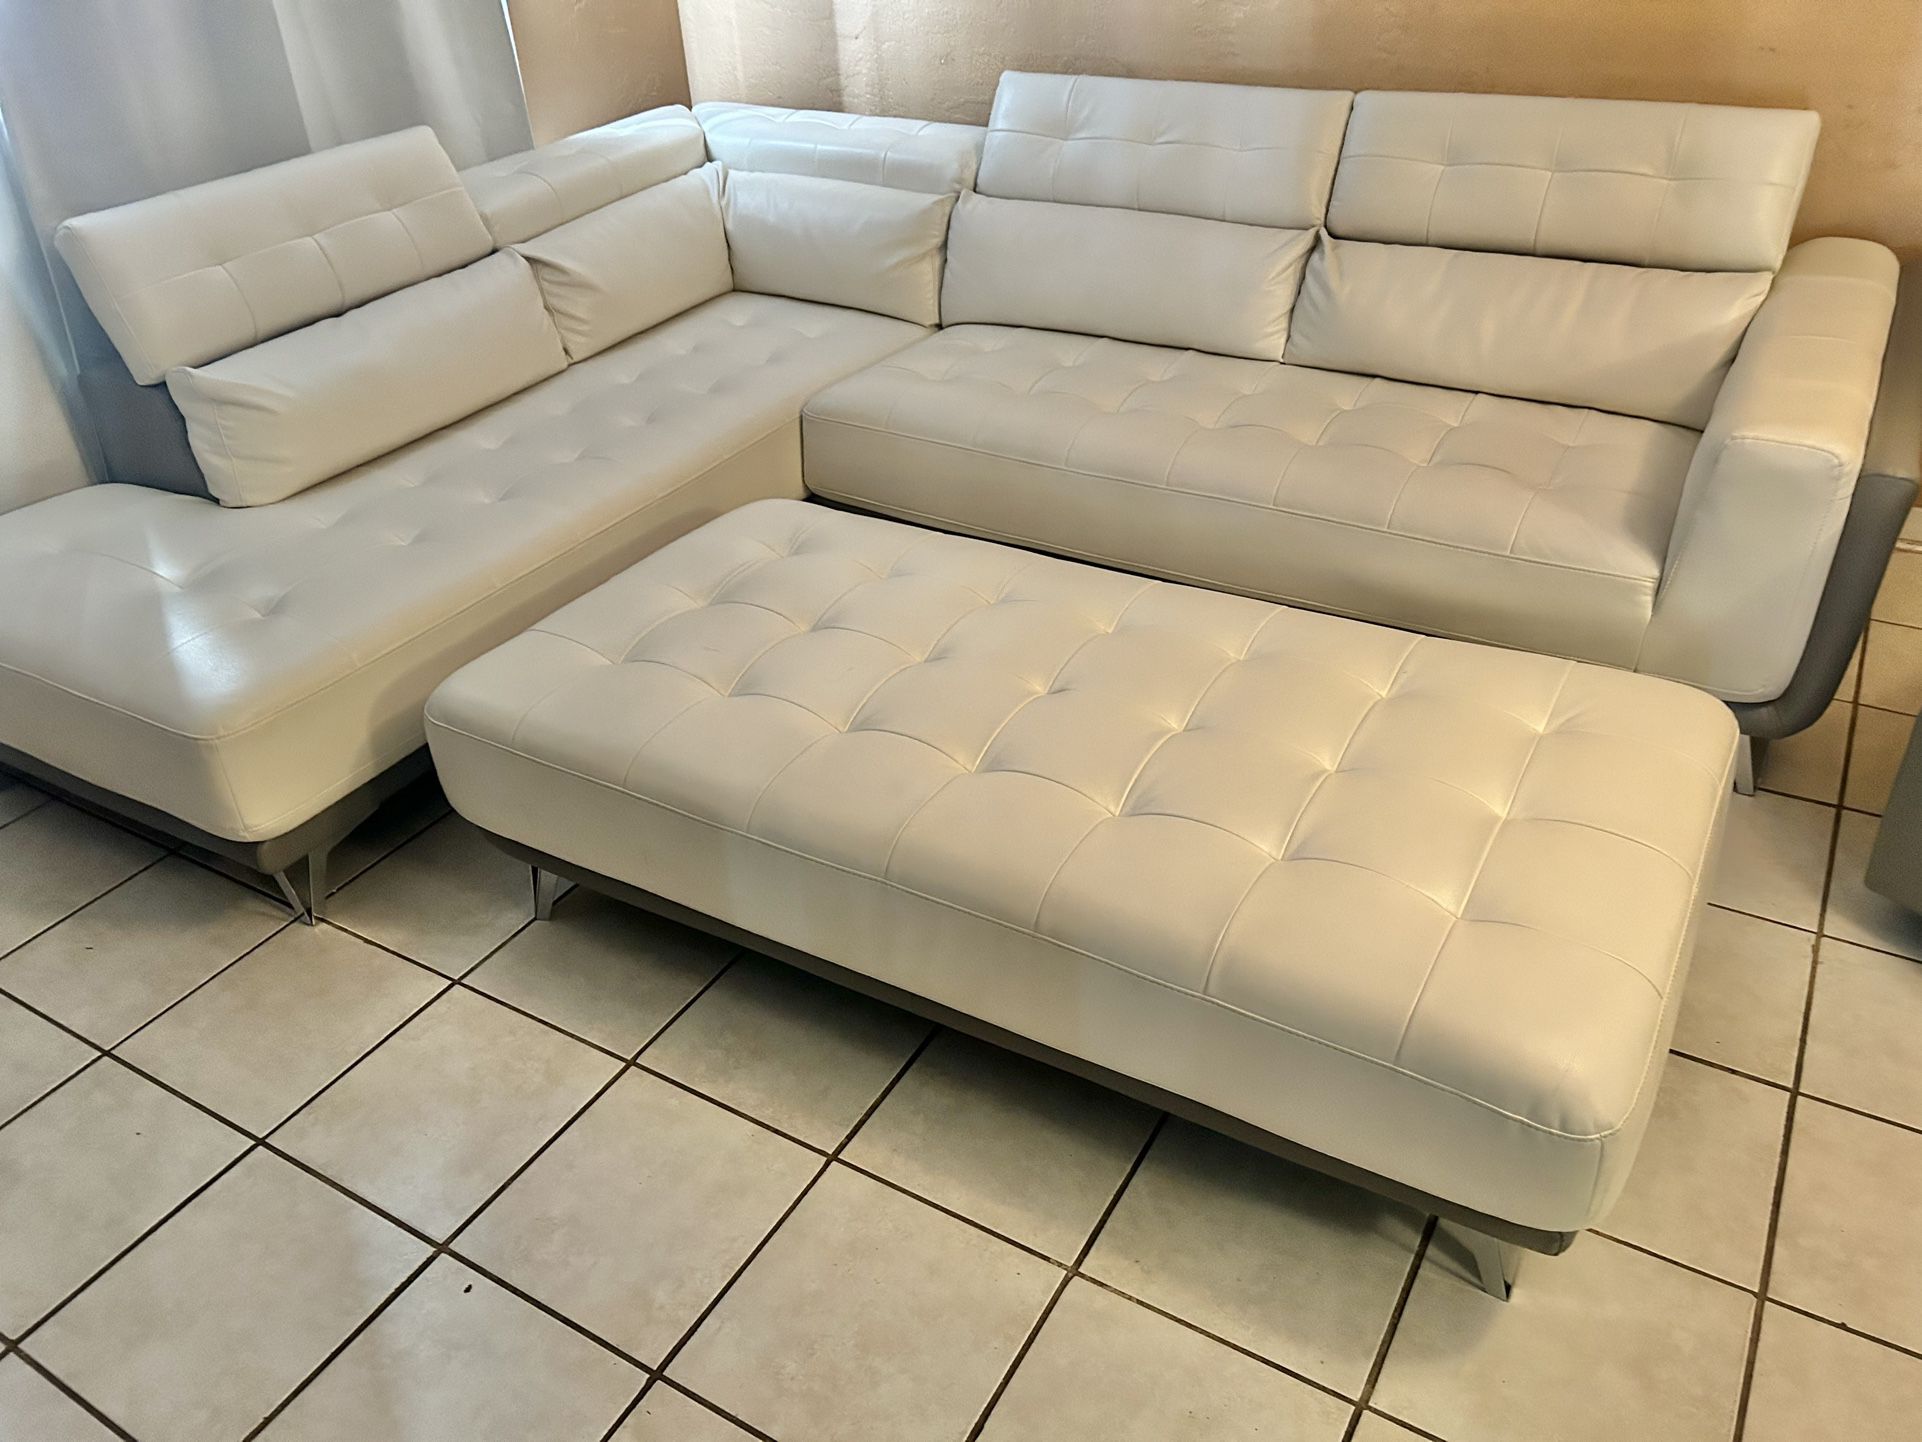 Like New 6 Months Old Large 2-tone Leather Sectional Couch With Flip up Headrests And Corner Storage And Ottoman 